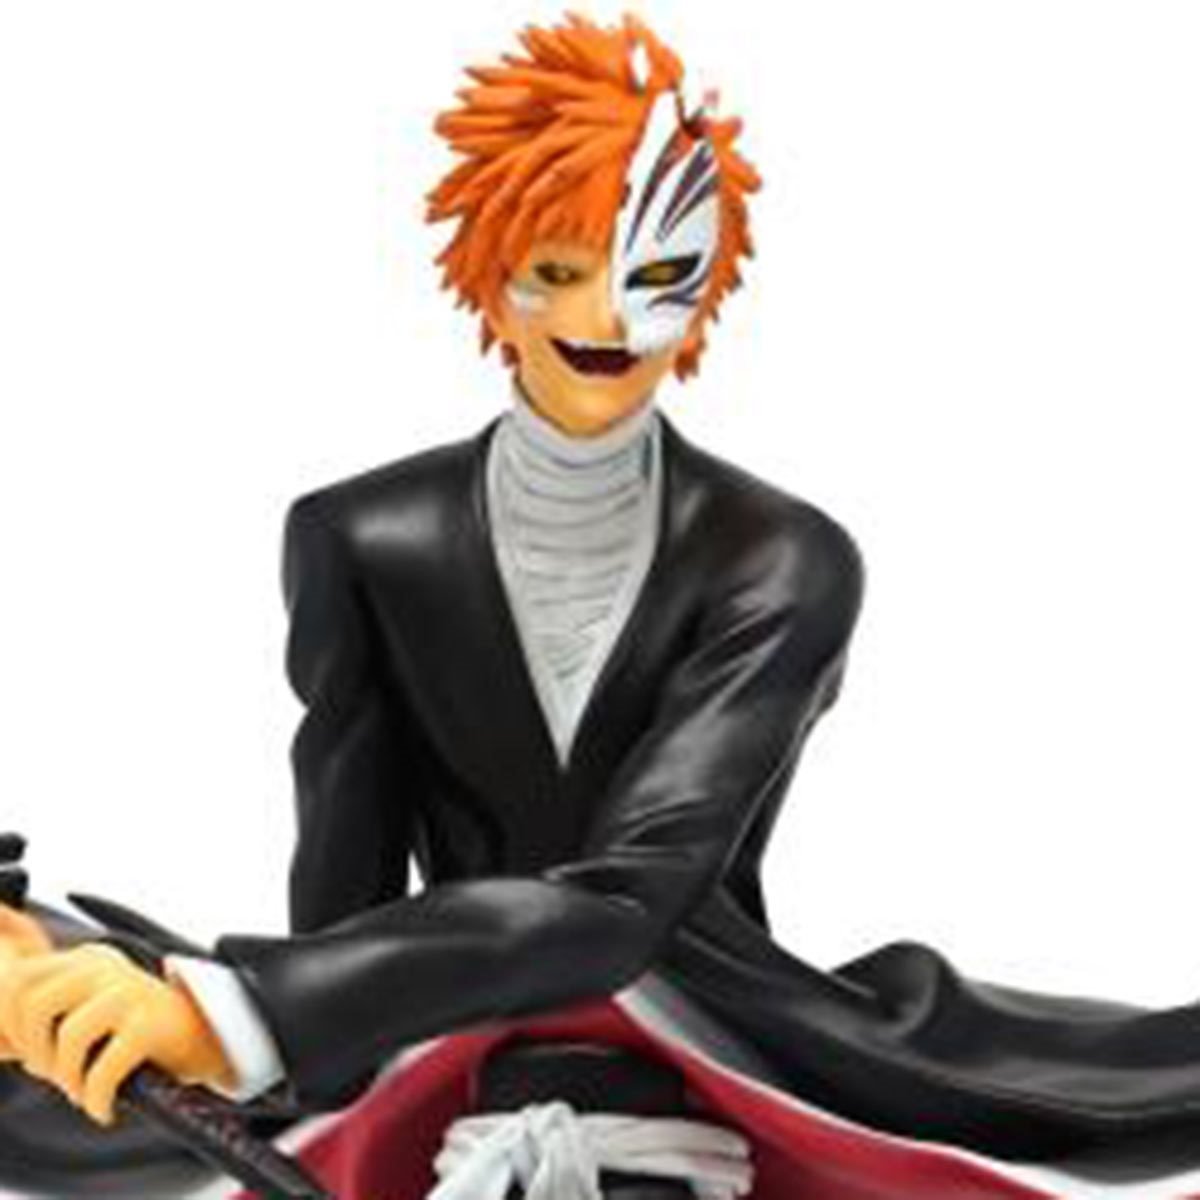  ABYSTYLE Studio Bleach Ichigo 7.5 Tall SFC Collectible PVC  Figure Statue Anime Manga Figurine Home Room Office Décor Gift : Toys &  Games